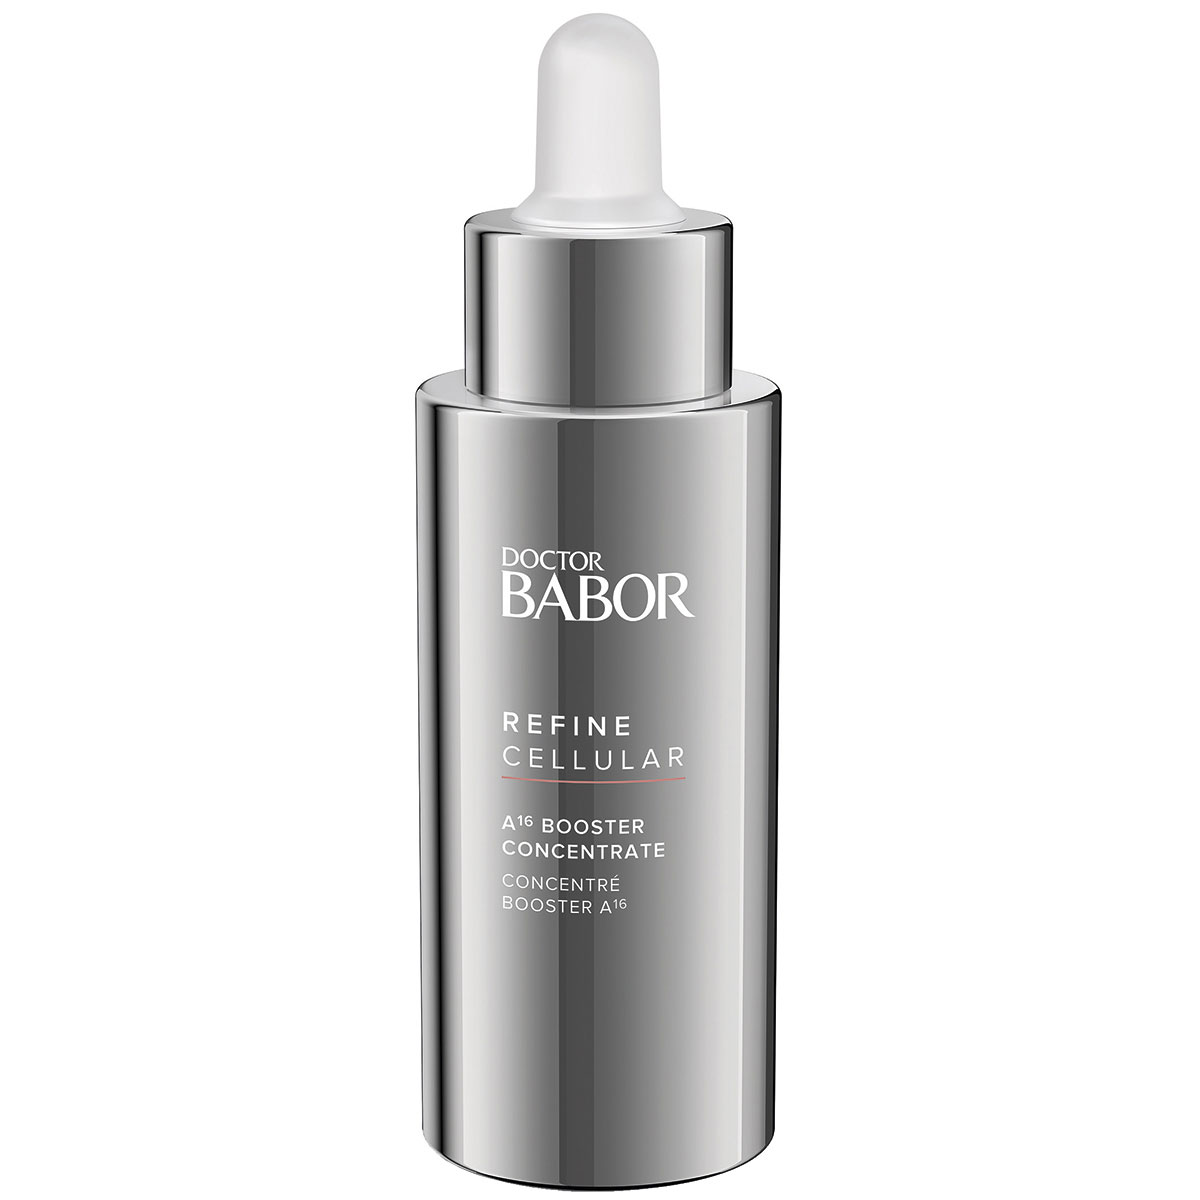 Концентрат А16 Refine Cellular/A16 Booster Concentrate BABOR